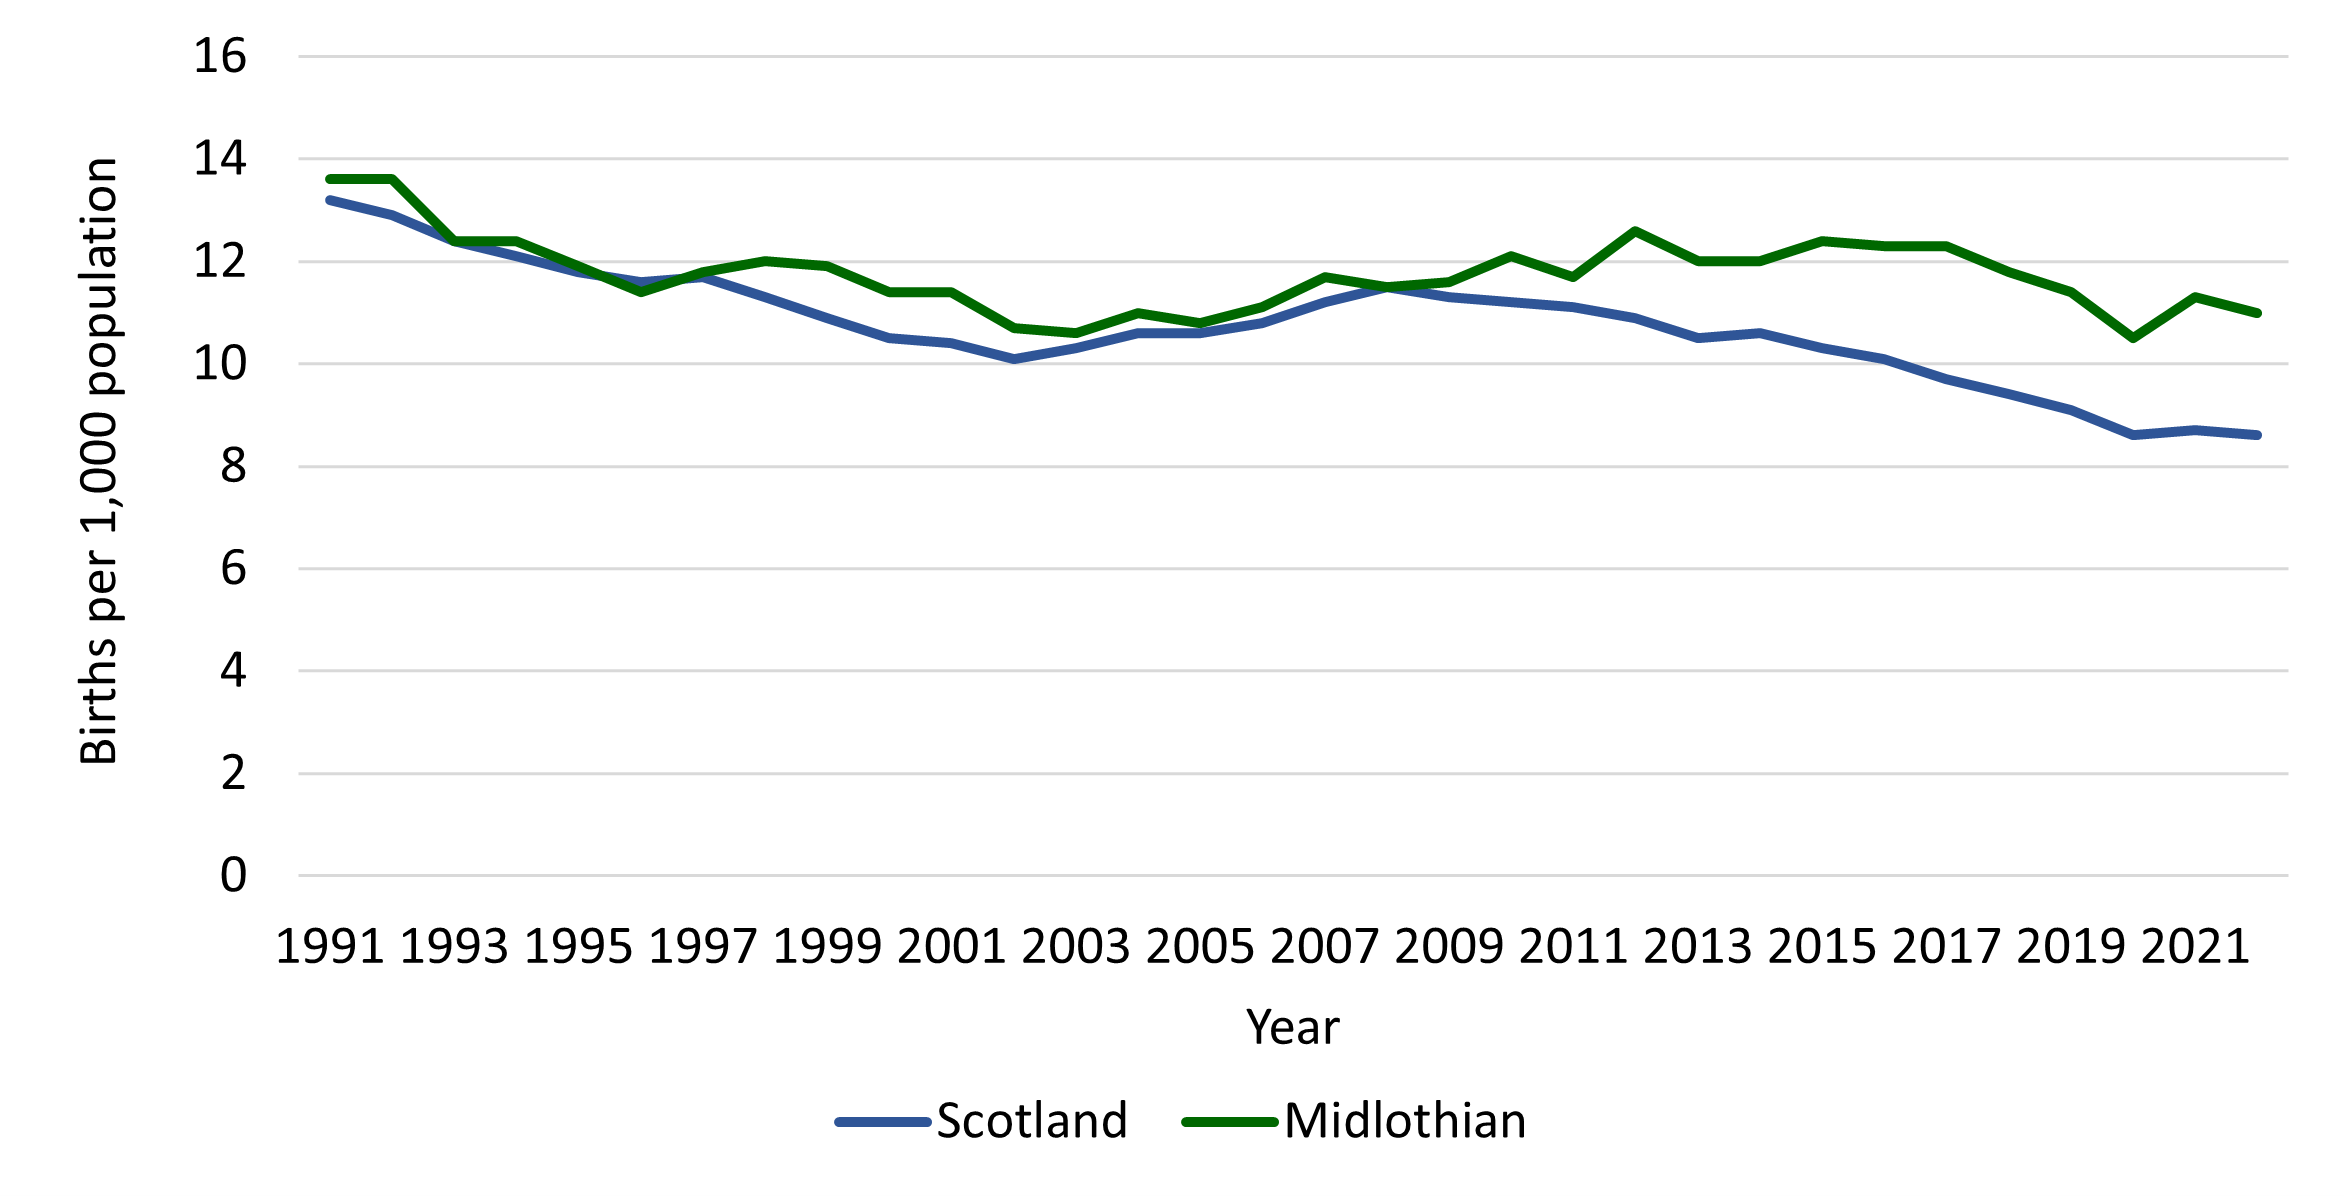 Line graph showing Midlothian standardised birth rate being higher than the Scotland rate between 2011 to 2021. With an increase of 9.4% from 2020 to 2021.